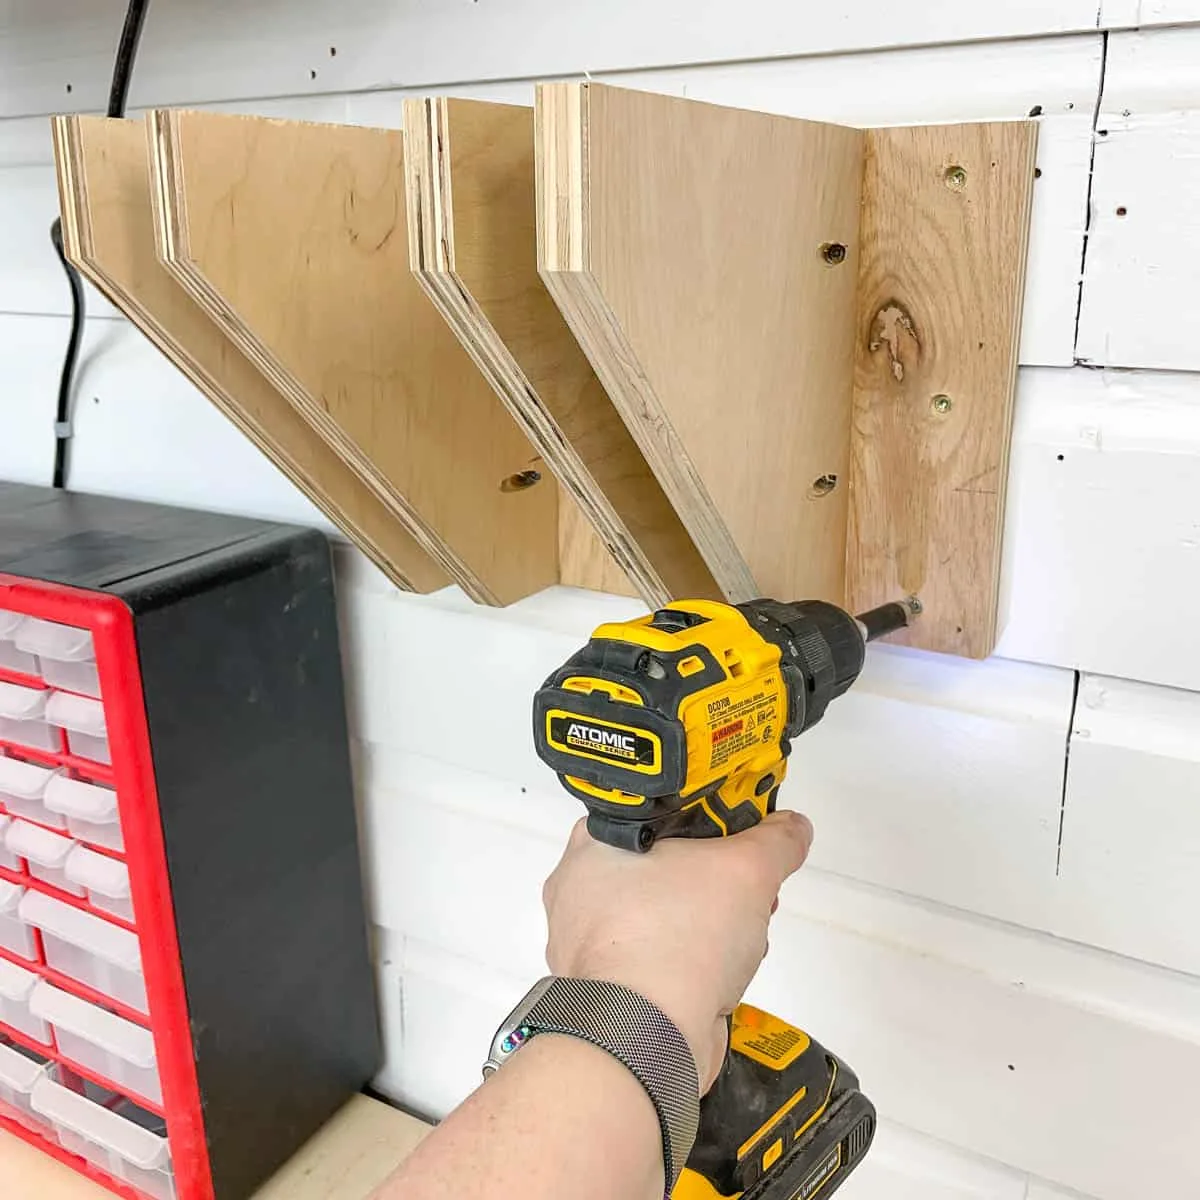 screwing DIY clamp rack to the wall with a cordless drill